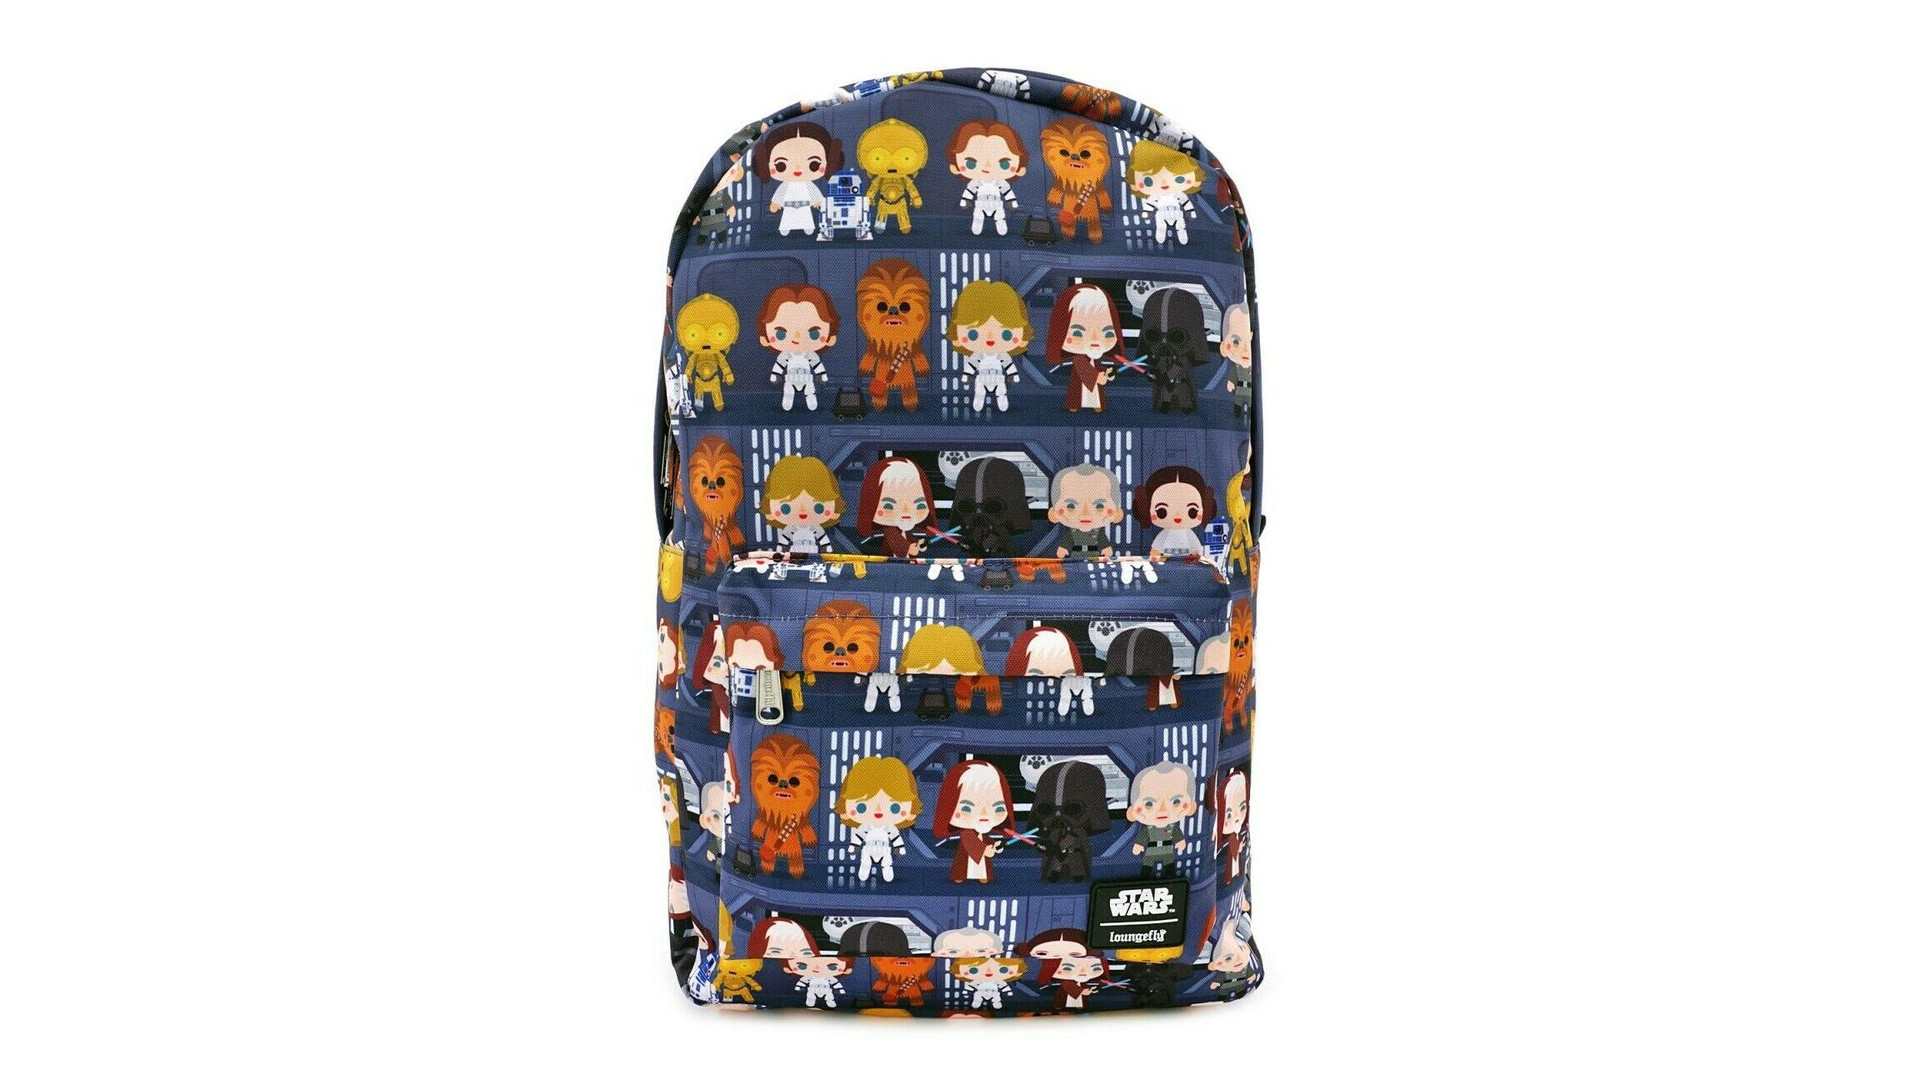 Acheter Sac A Dos Loungefly - Star Wars - Printed Nylon Backpack